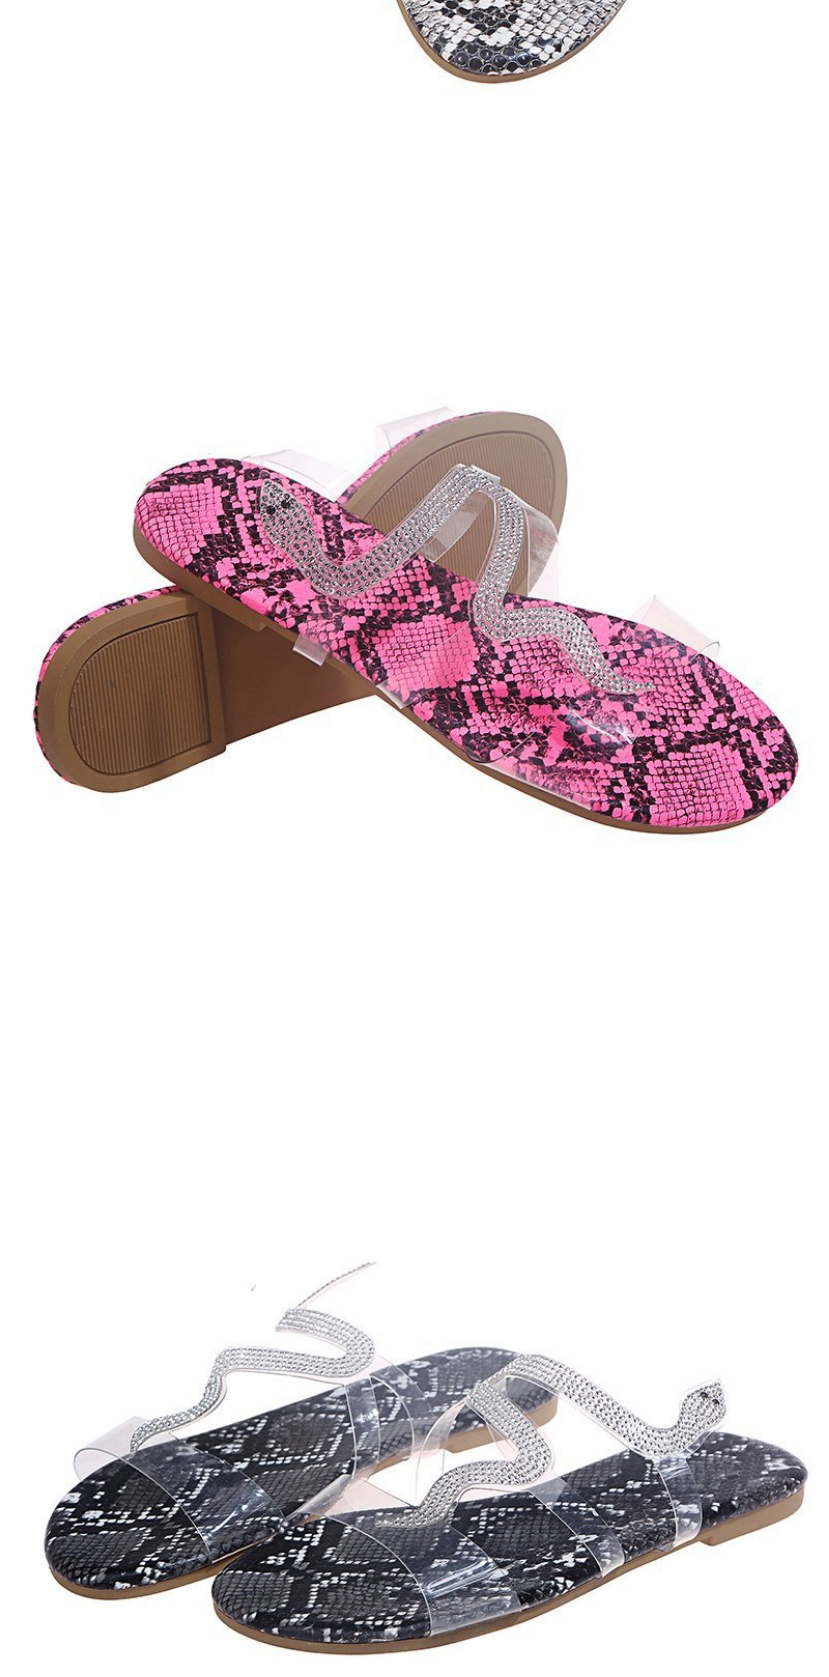 Fashion Red Serpentine Flat Sand Beach Slippers,Slippers